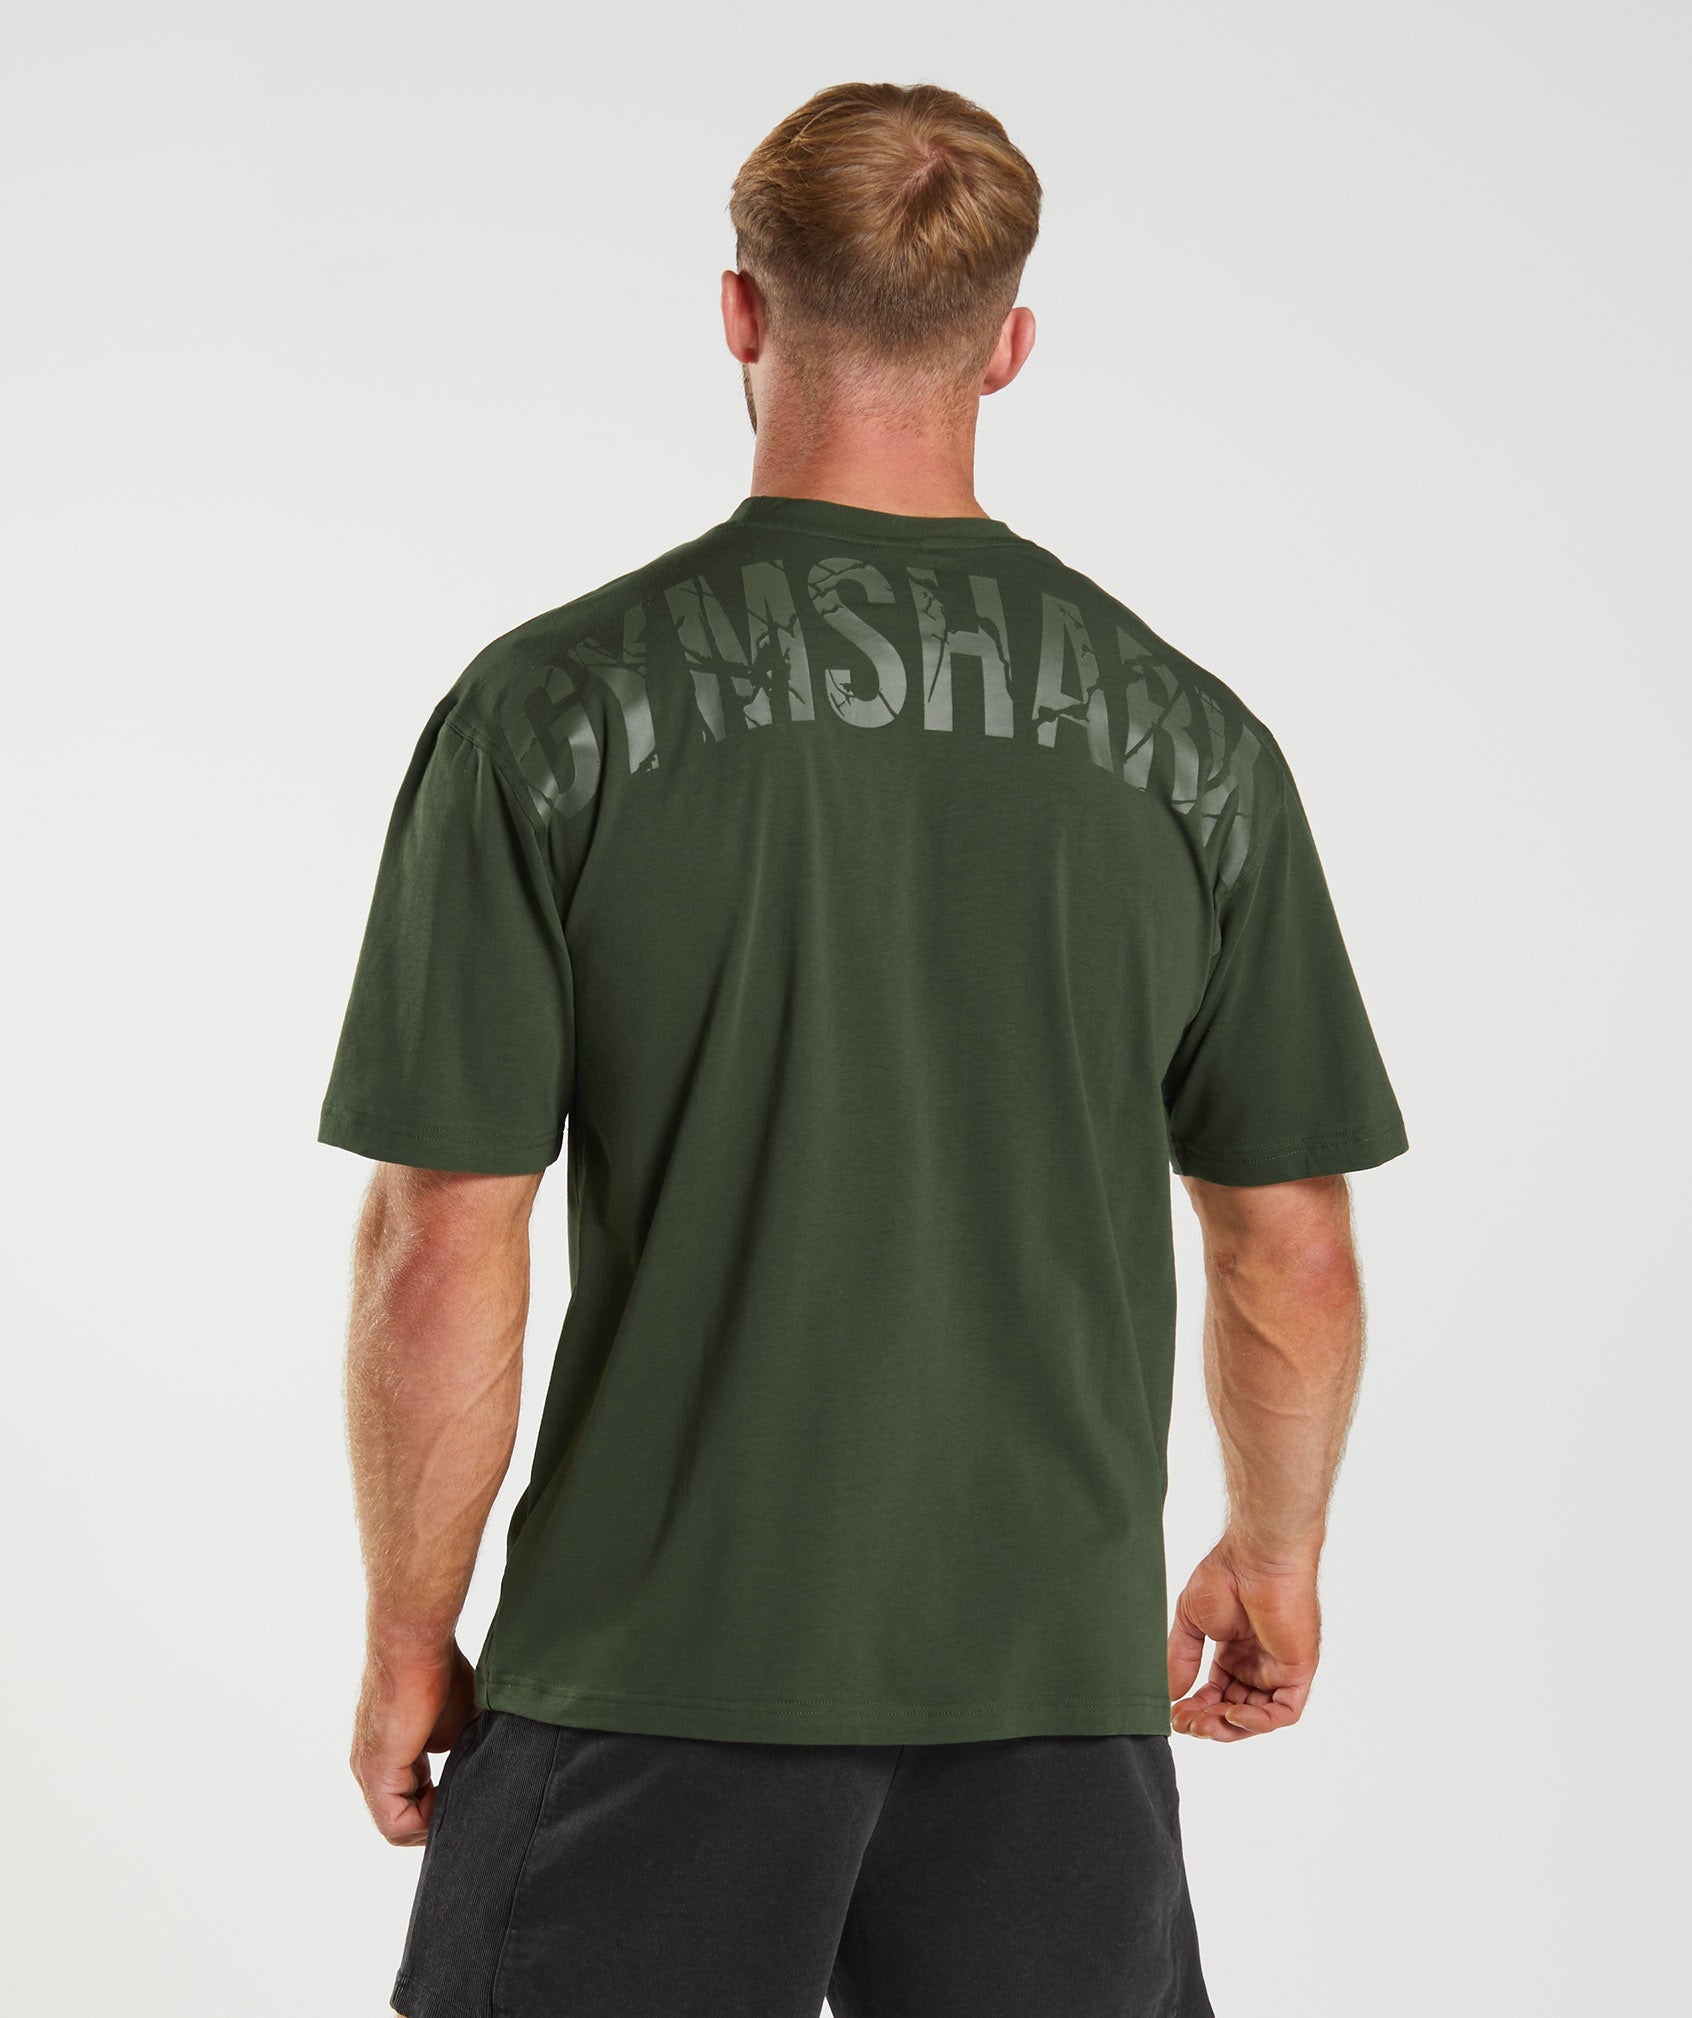 Power T-Shirt in Moss Olive - view 1